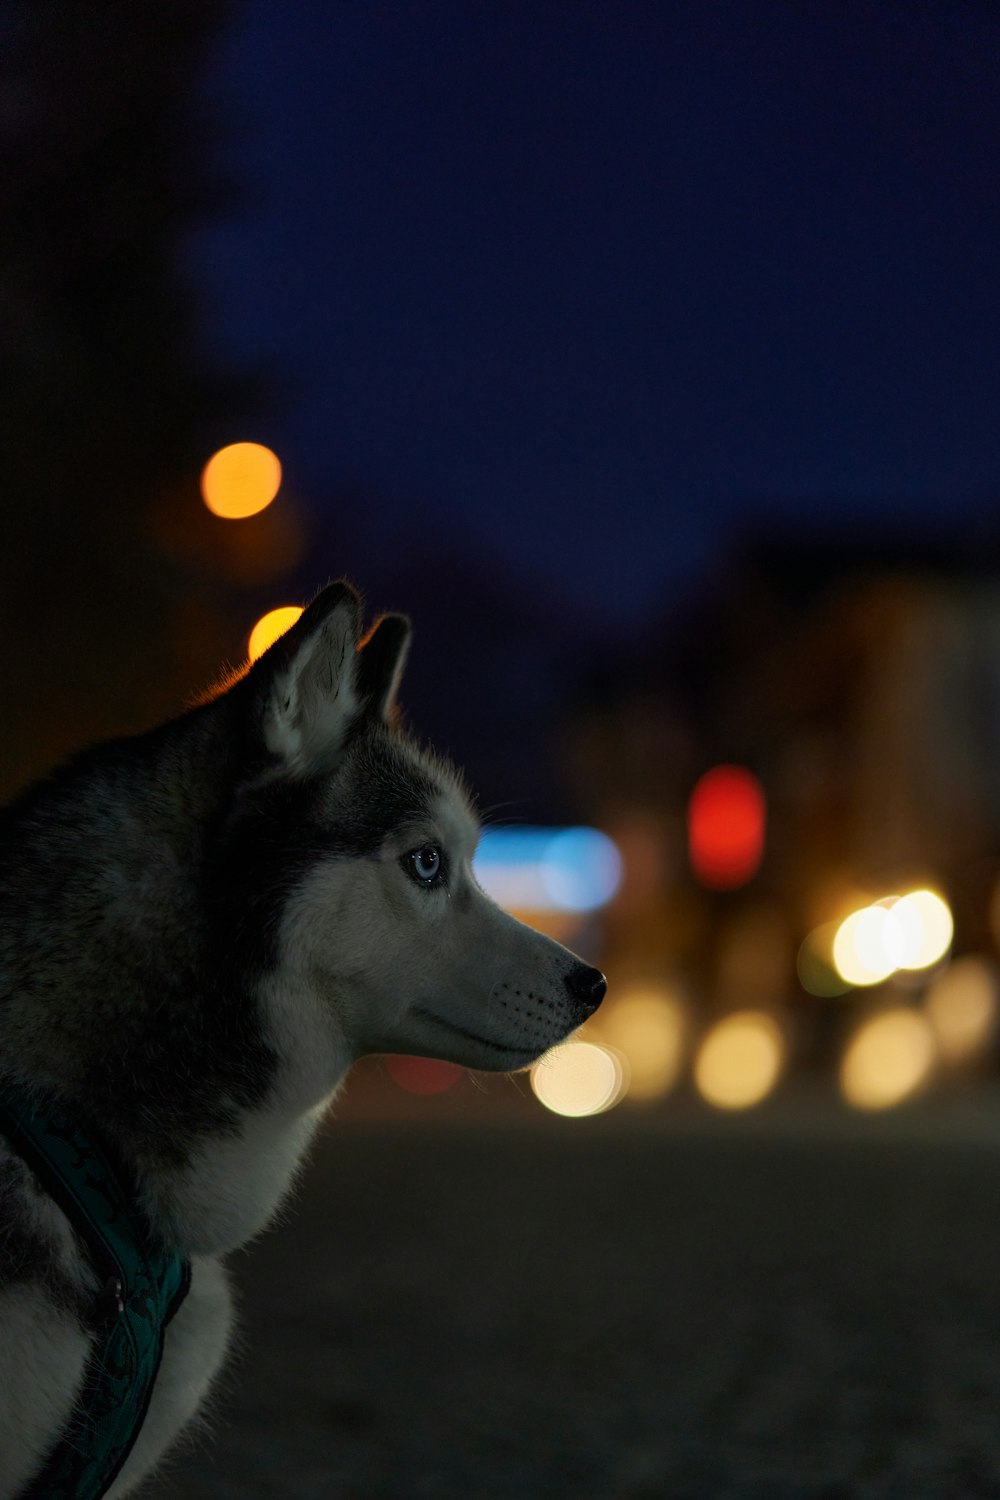 a husky dog standing on a street at night